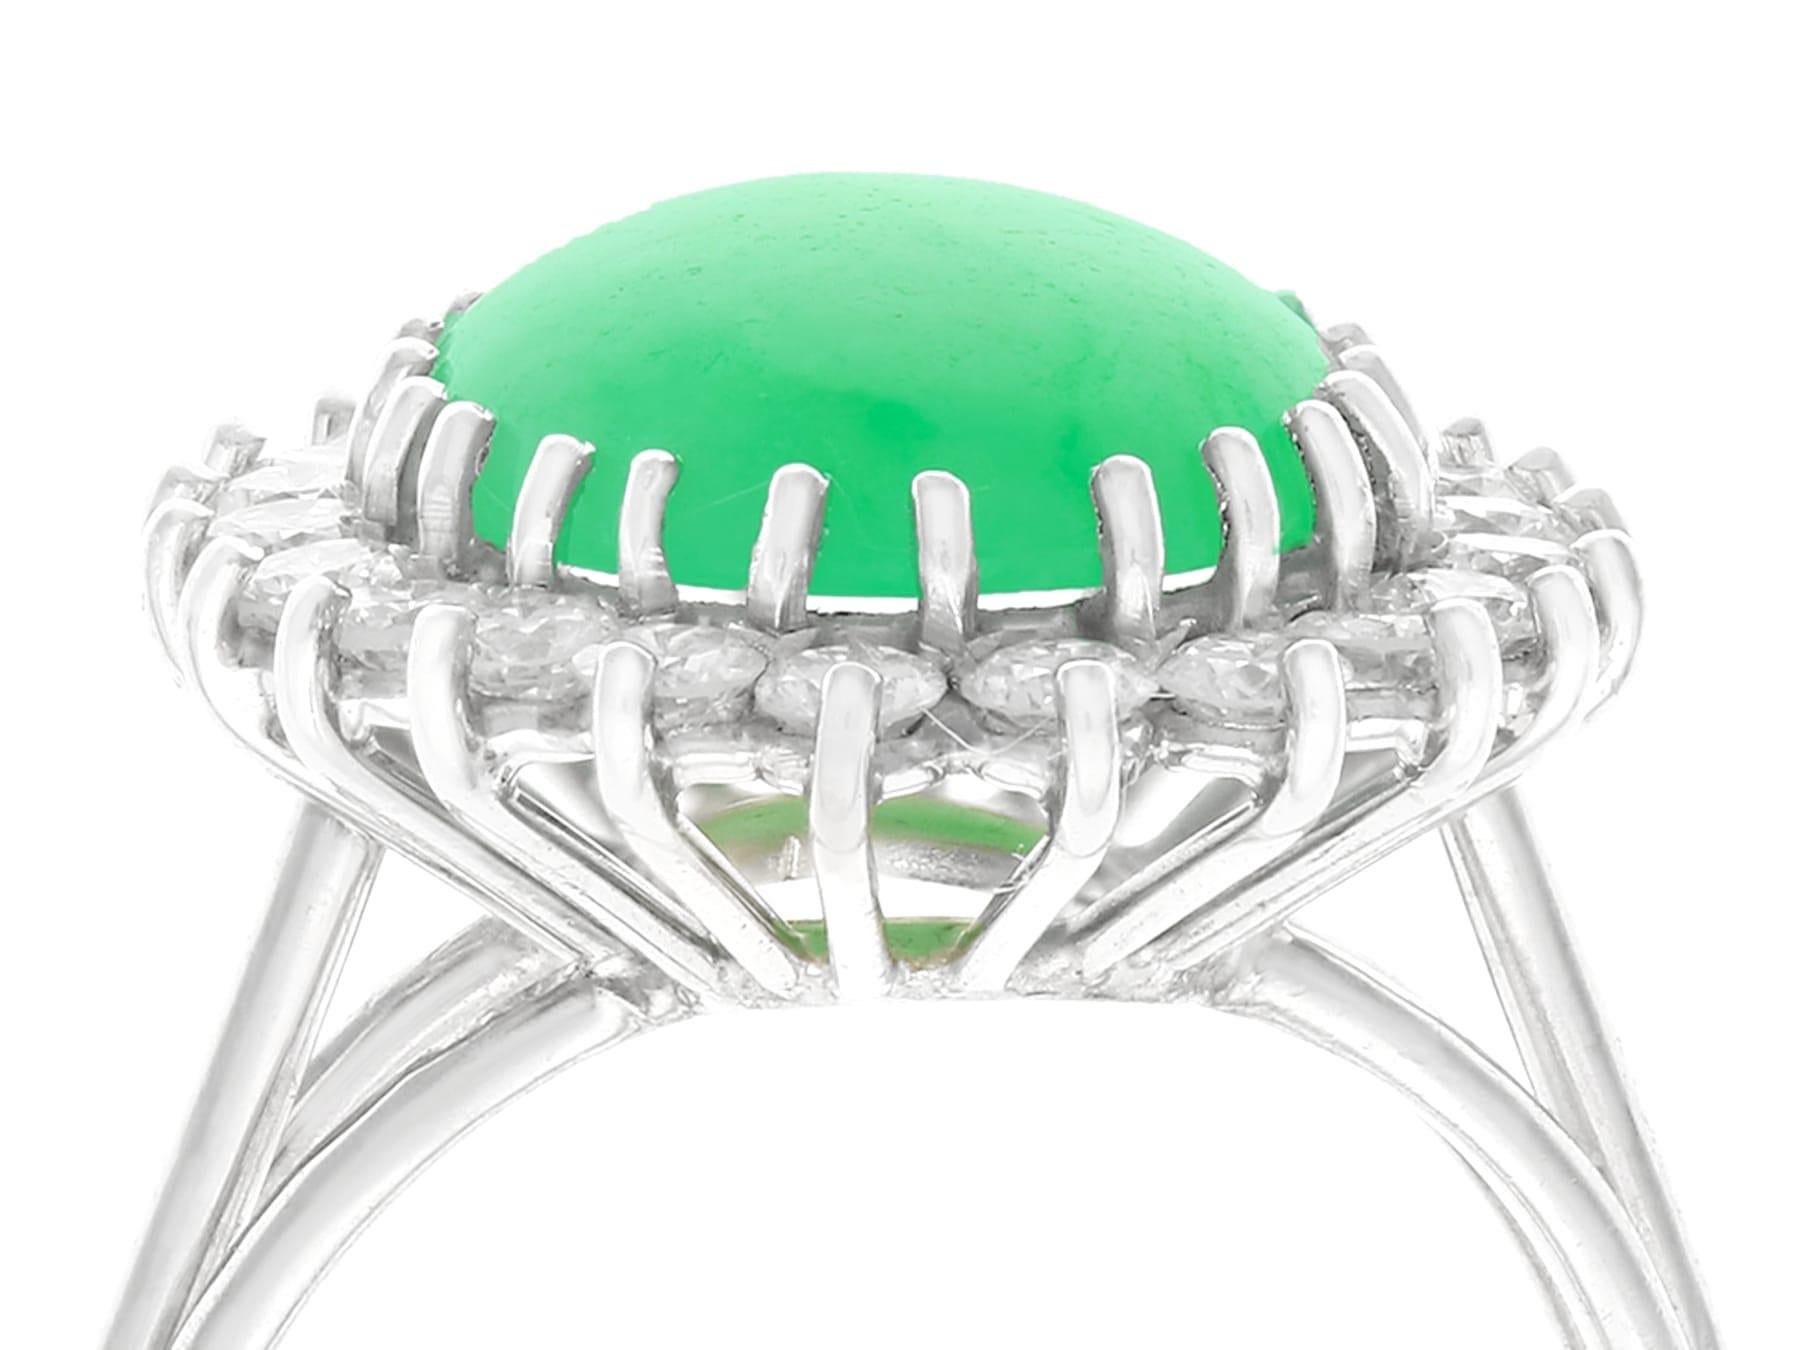 An impressive 4.91 carat jadeite and 1.00 carat diamond, 15 karat white gold cluster ring; part of our diverse gemstone jewelry and estate jewelry collections.

This fine and impressive vintage cabochon cut gemstone ring has been crafted in 15k